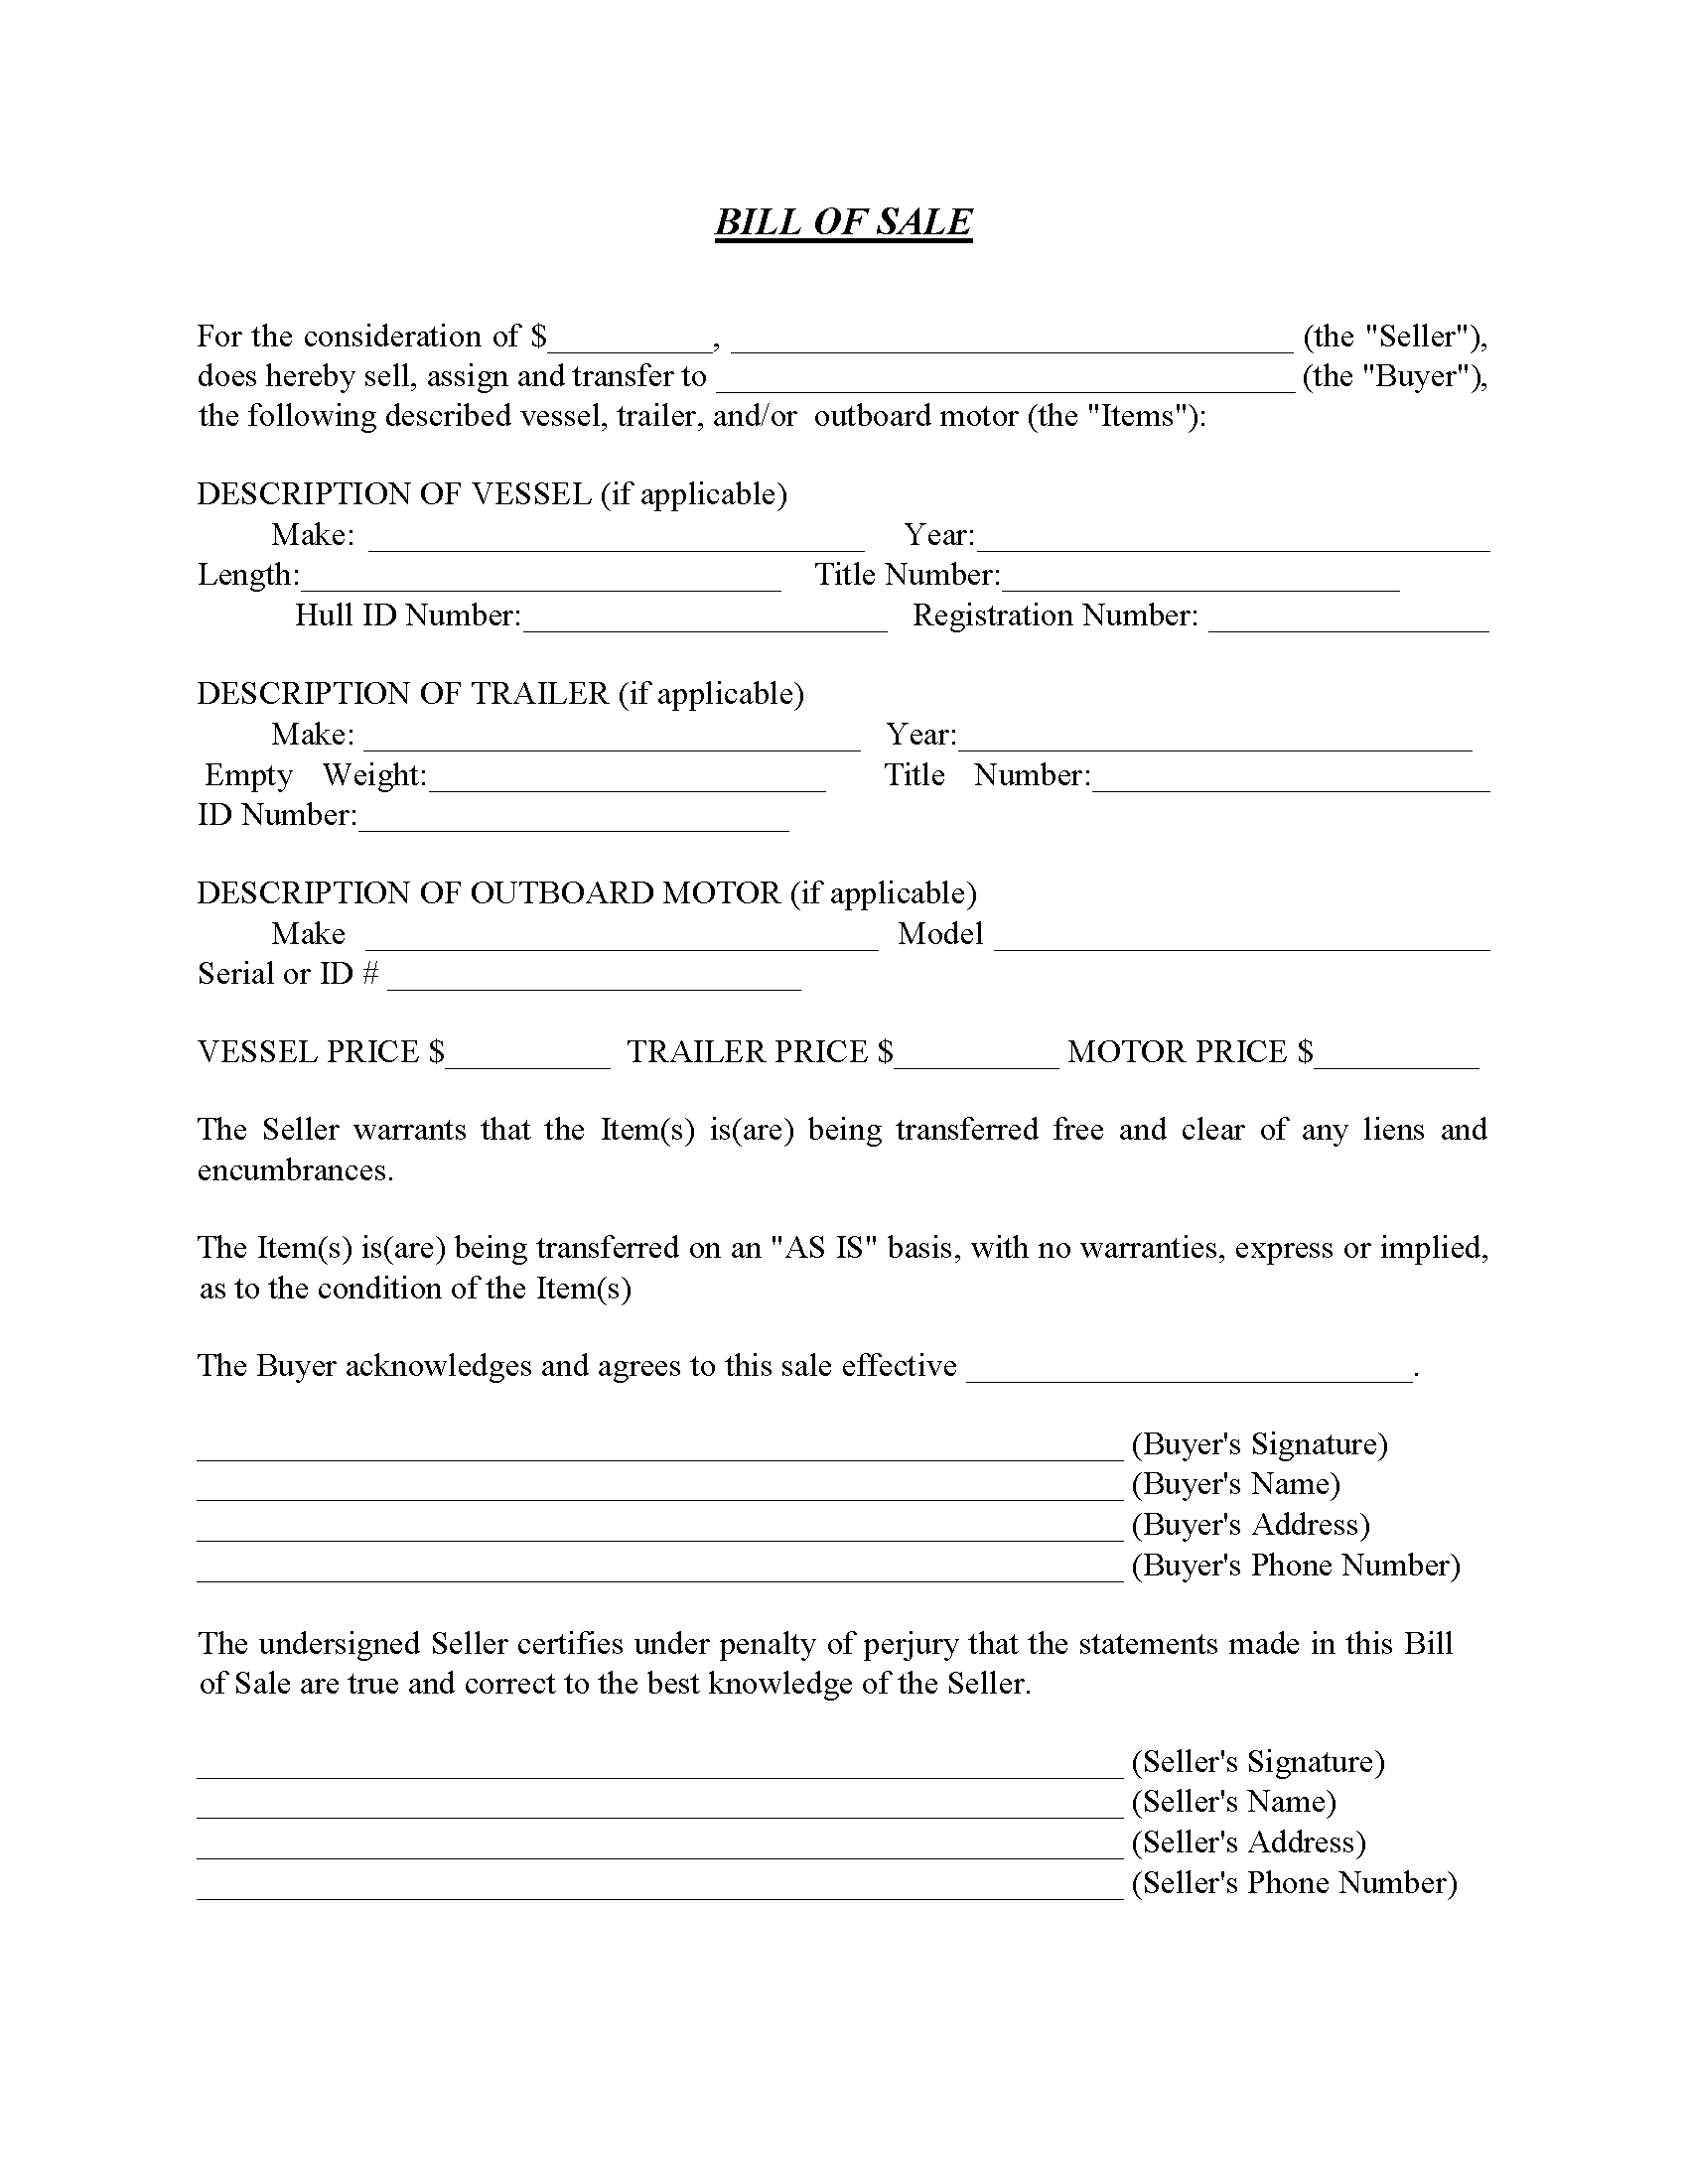 florida-boat-bill-of-sale-free-printable-legal-forms